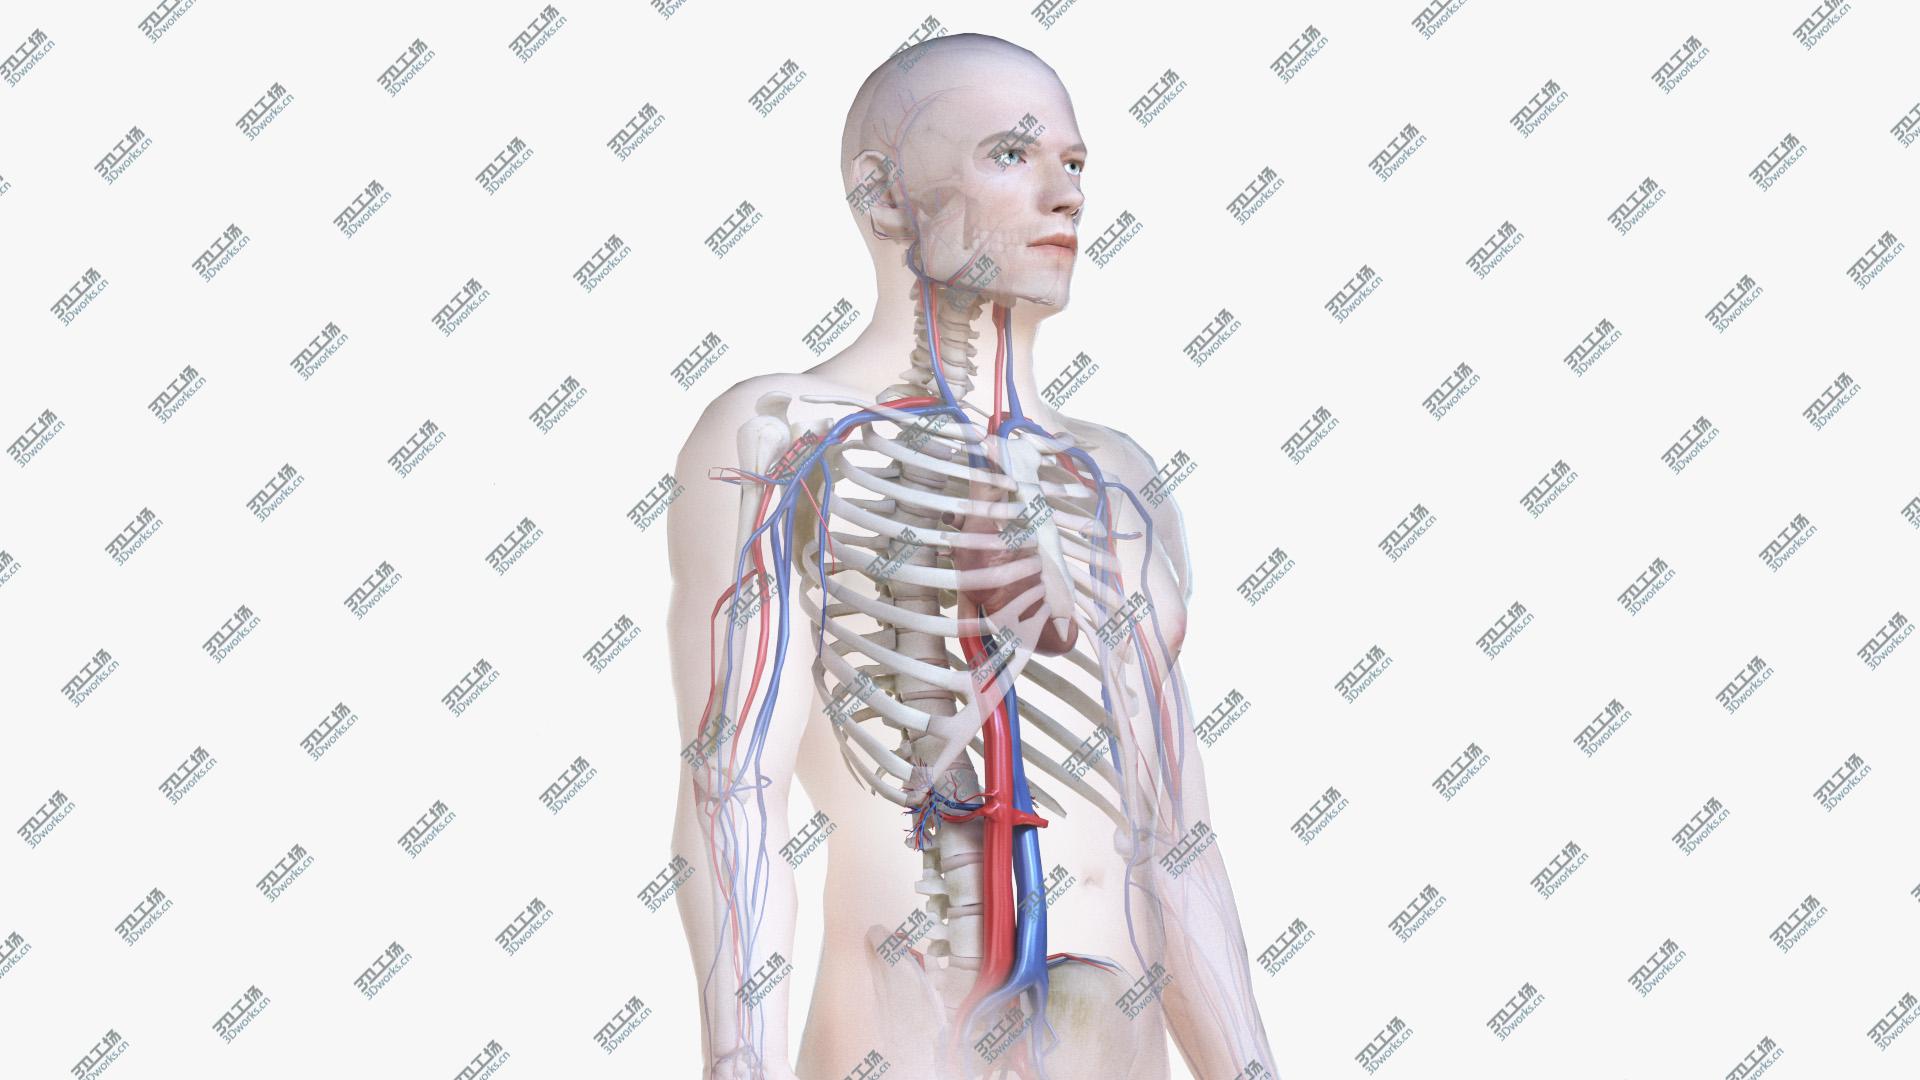 images/goods_img/20210313/3D Male Body, Skeleton and Vascular System (Low Poly)/2.jpg